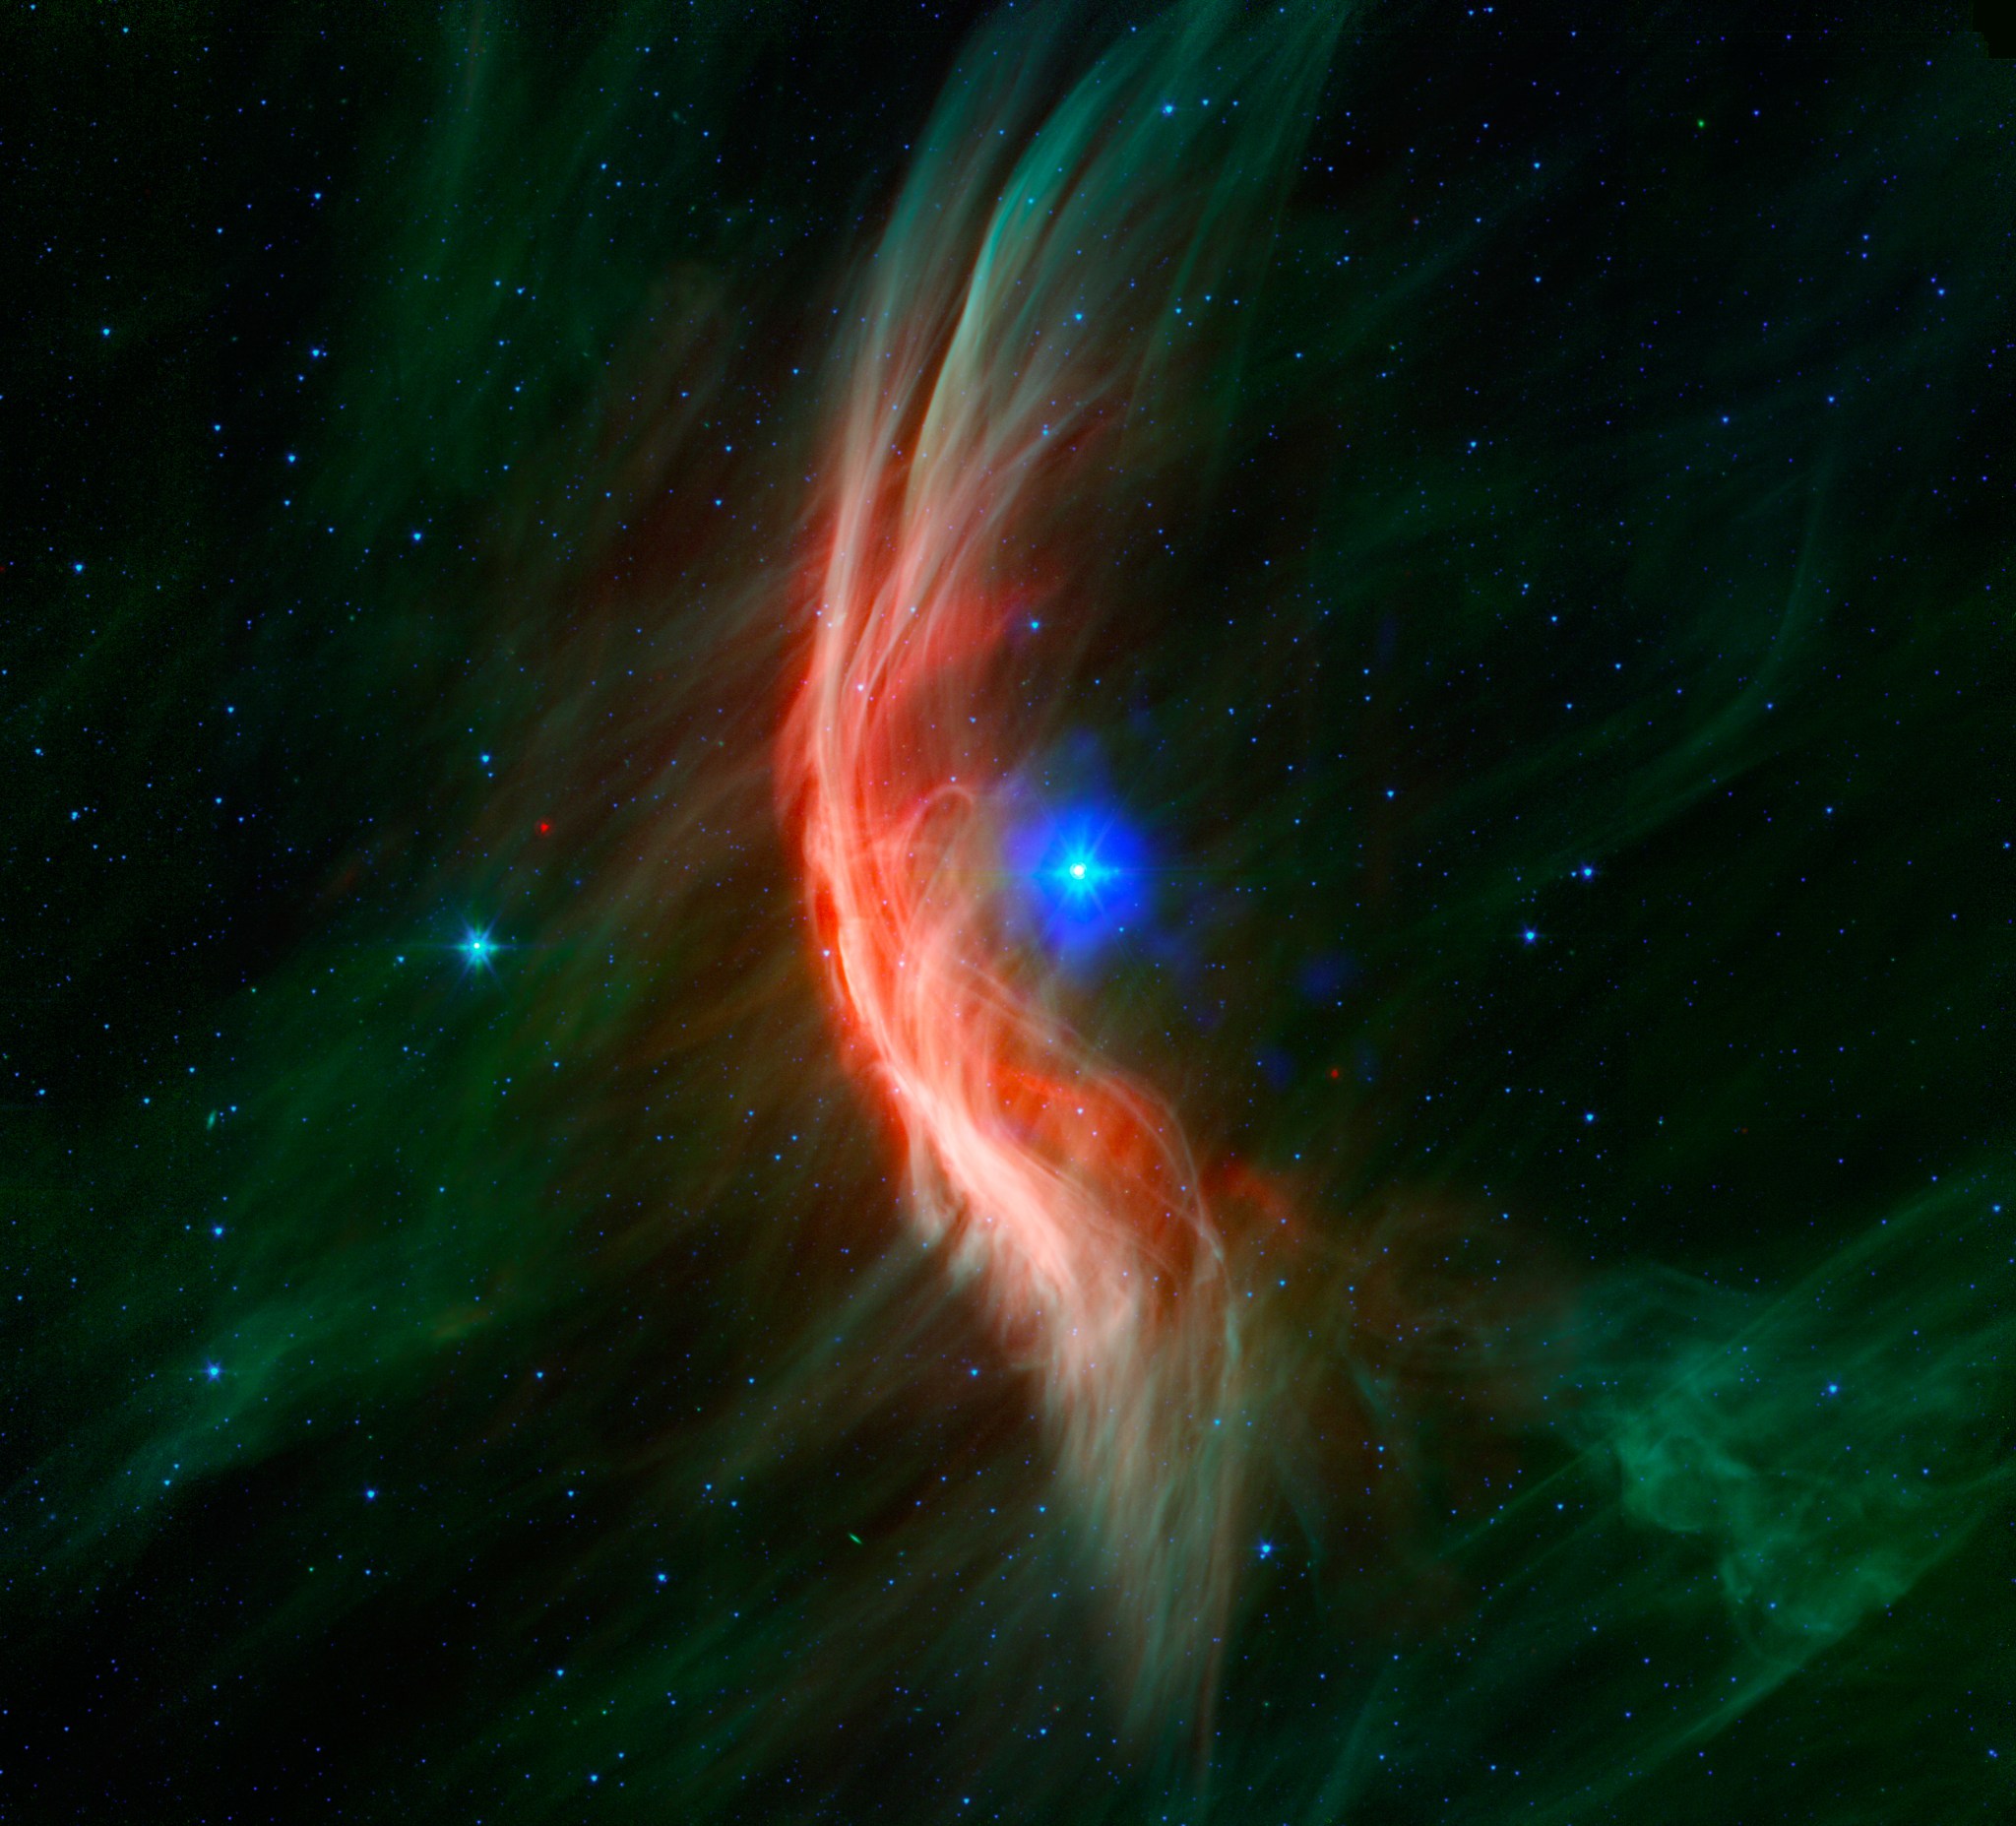 Located about 440 light-years from Earth, Zeta Ophiuchi is a hot star that is 20 times more massive than the Sun.